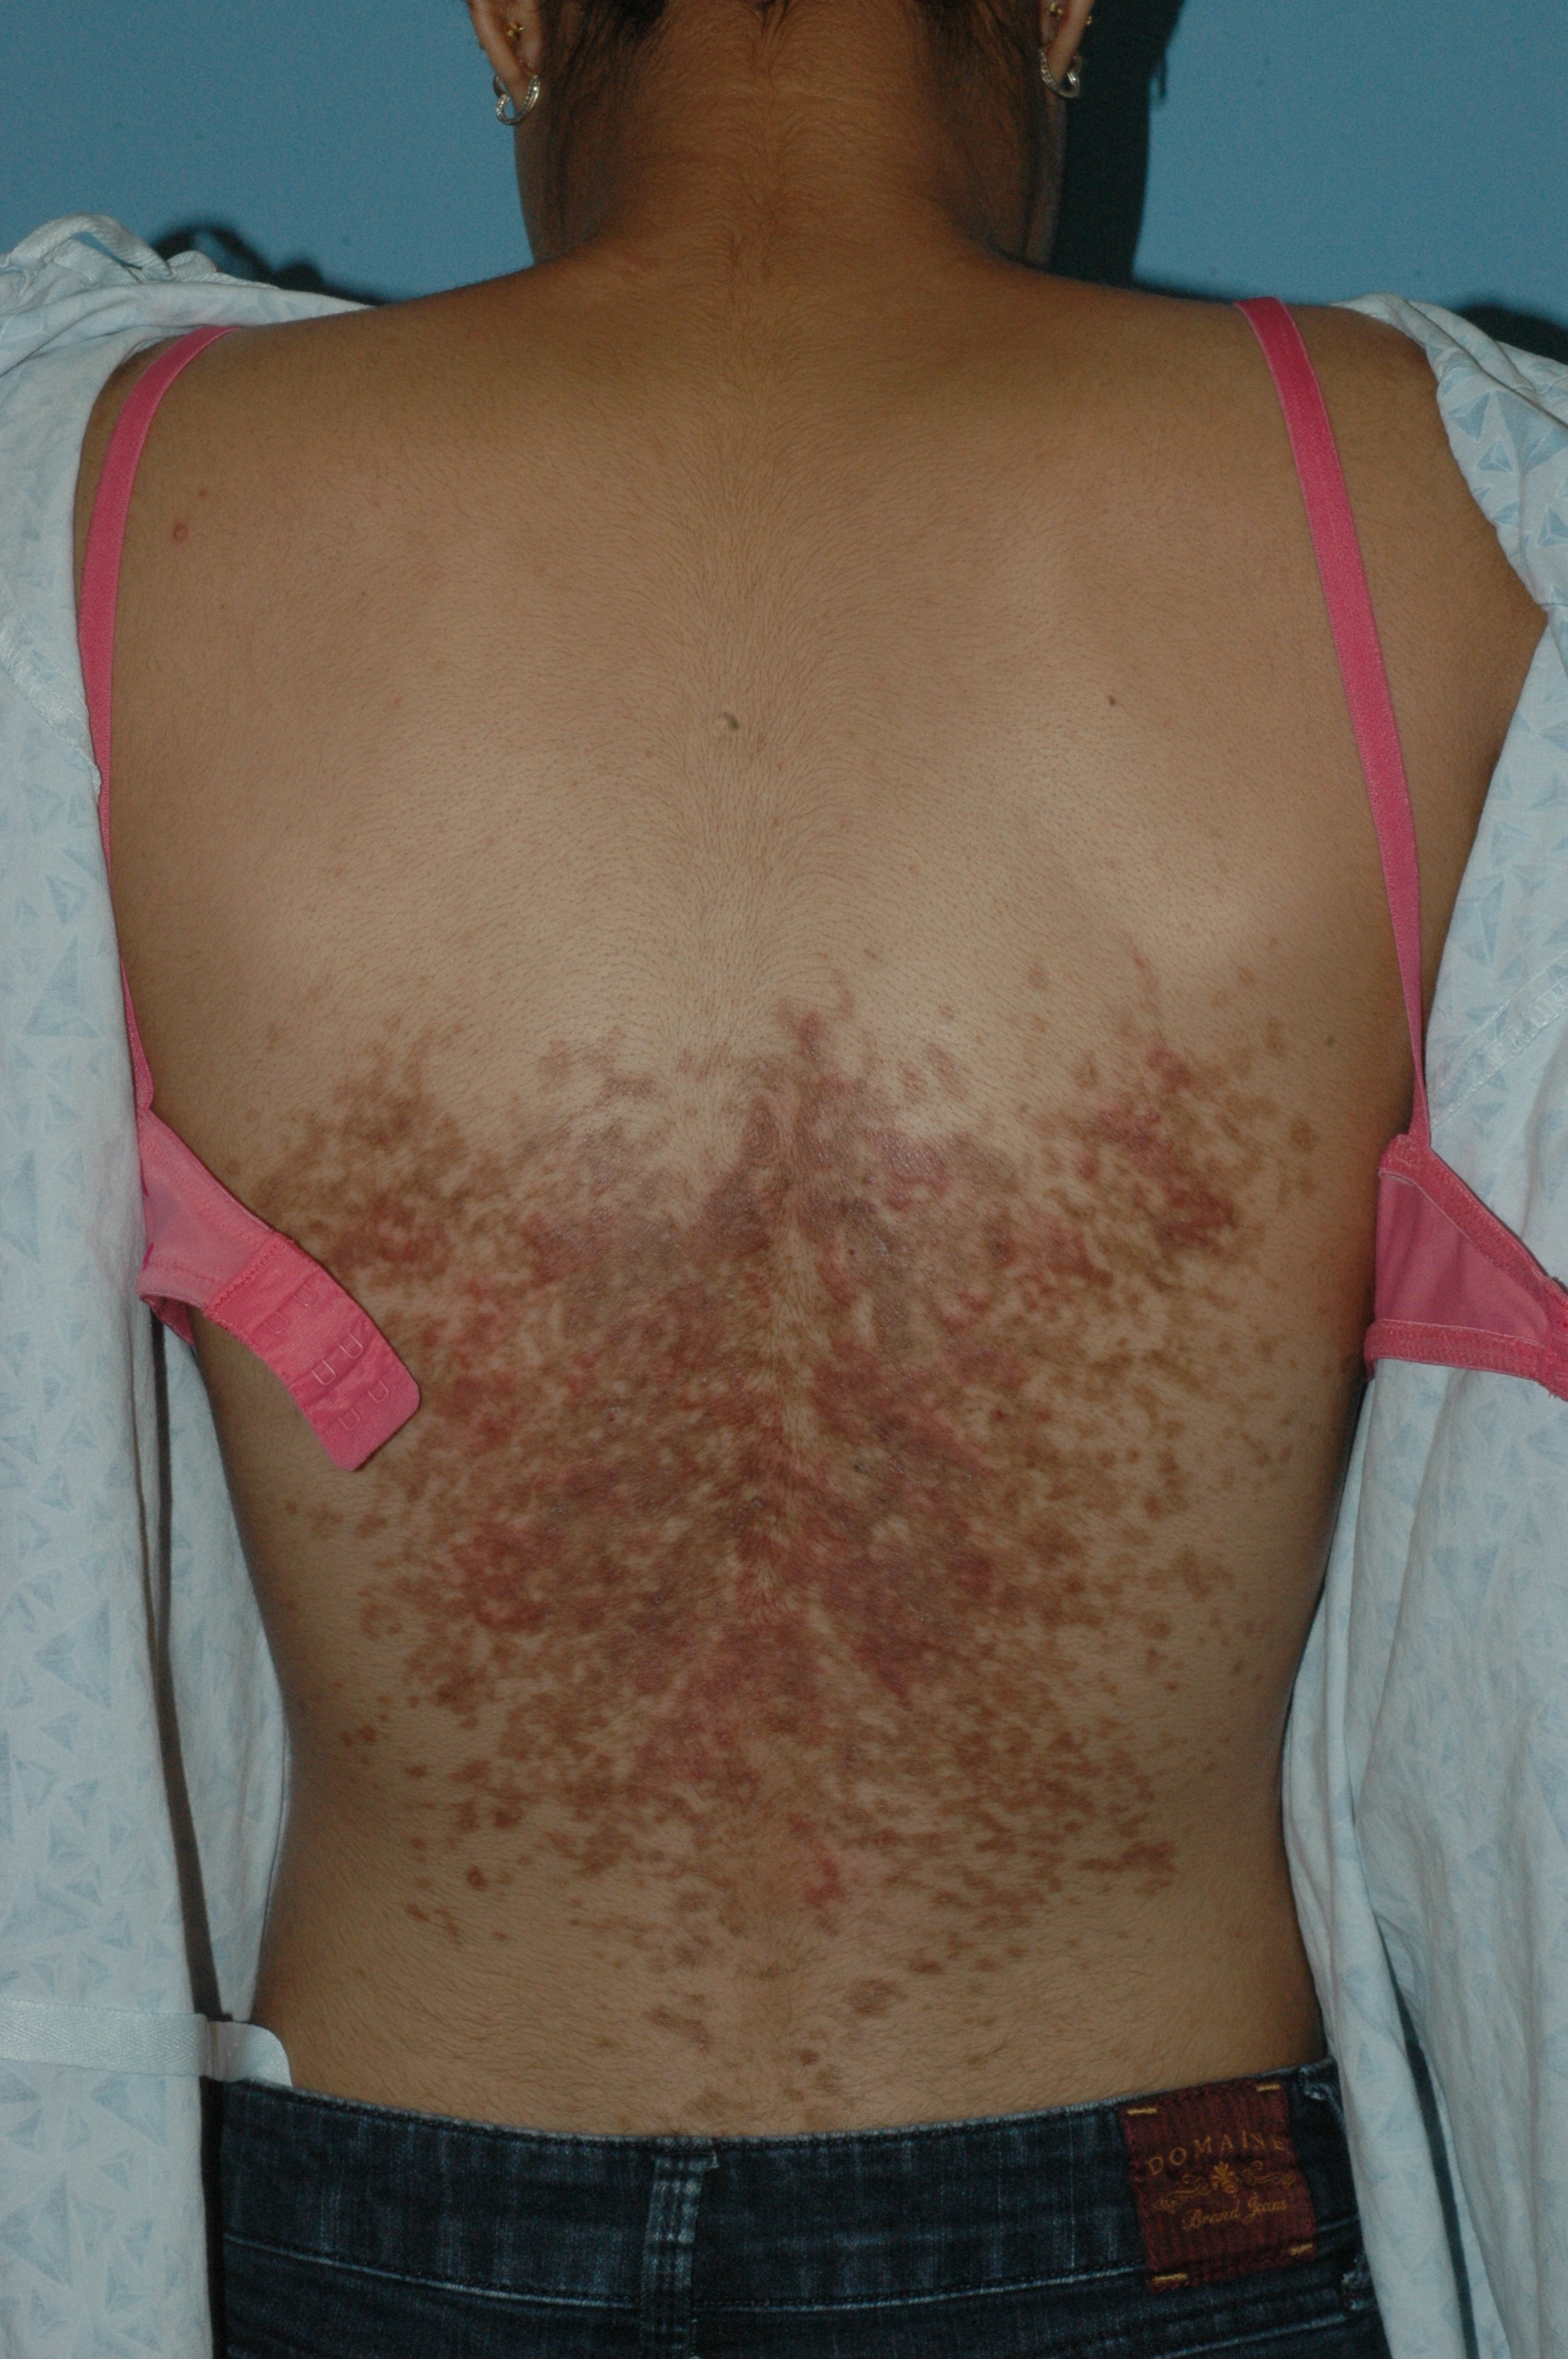 Pediatric Dermatology Consult - February 2017 - Whats your diagnosis?